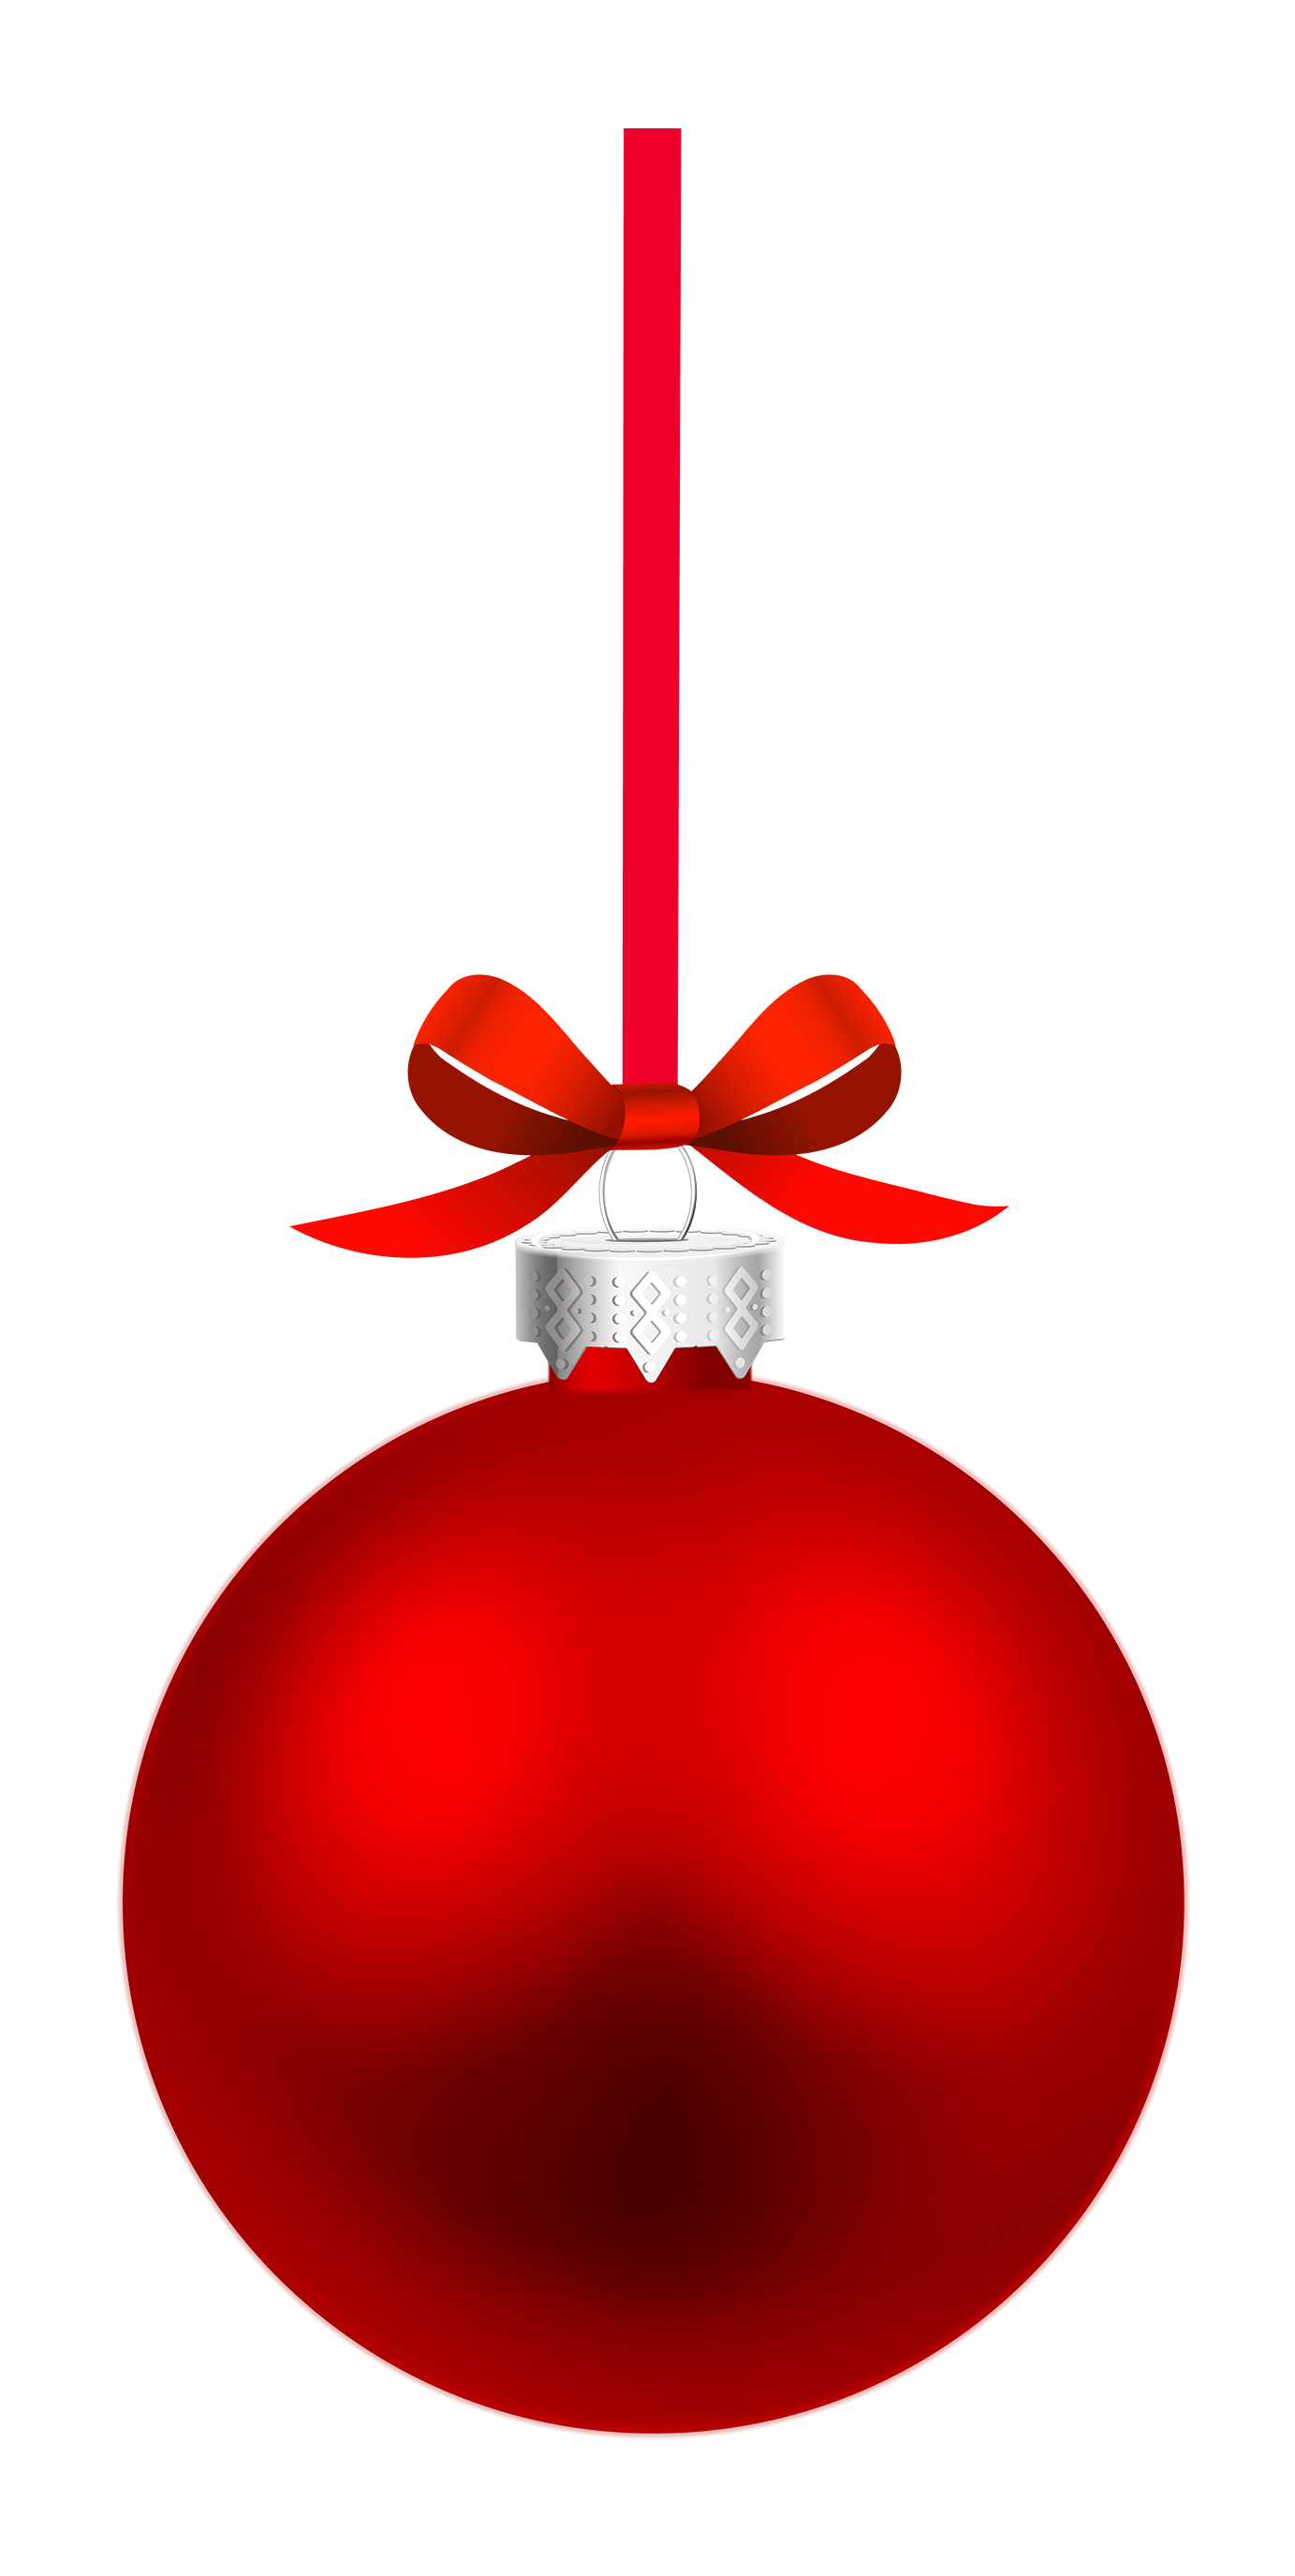 Red Christmas Ornament PNG HD Images Transparent - Christmas Ornament Png